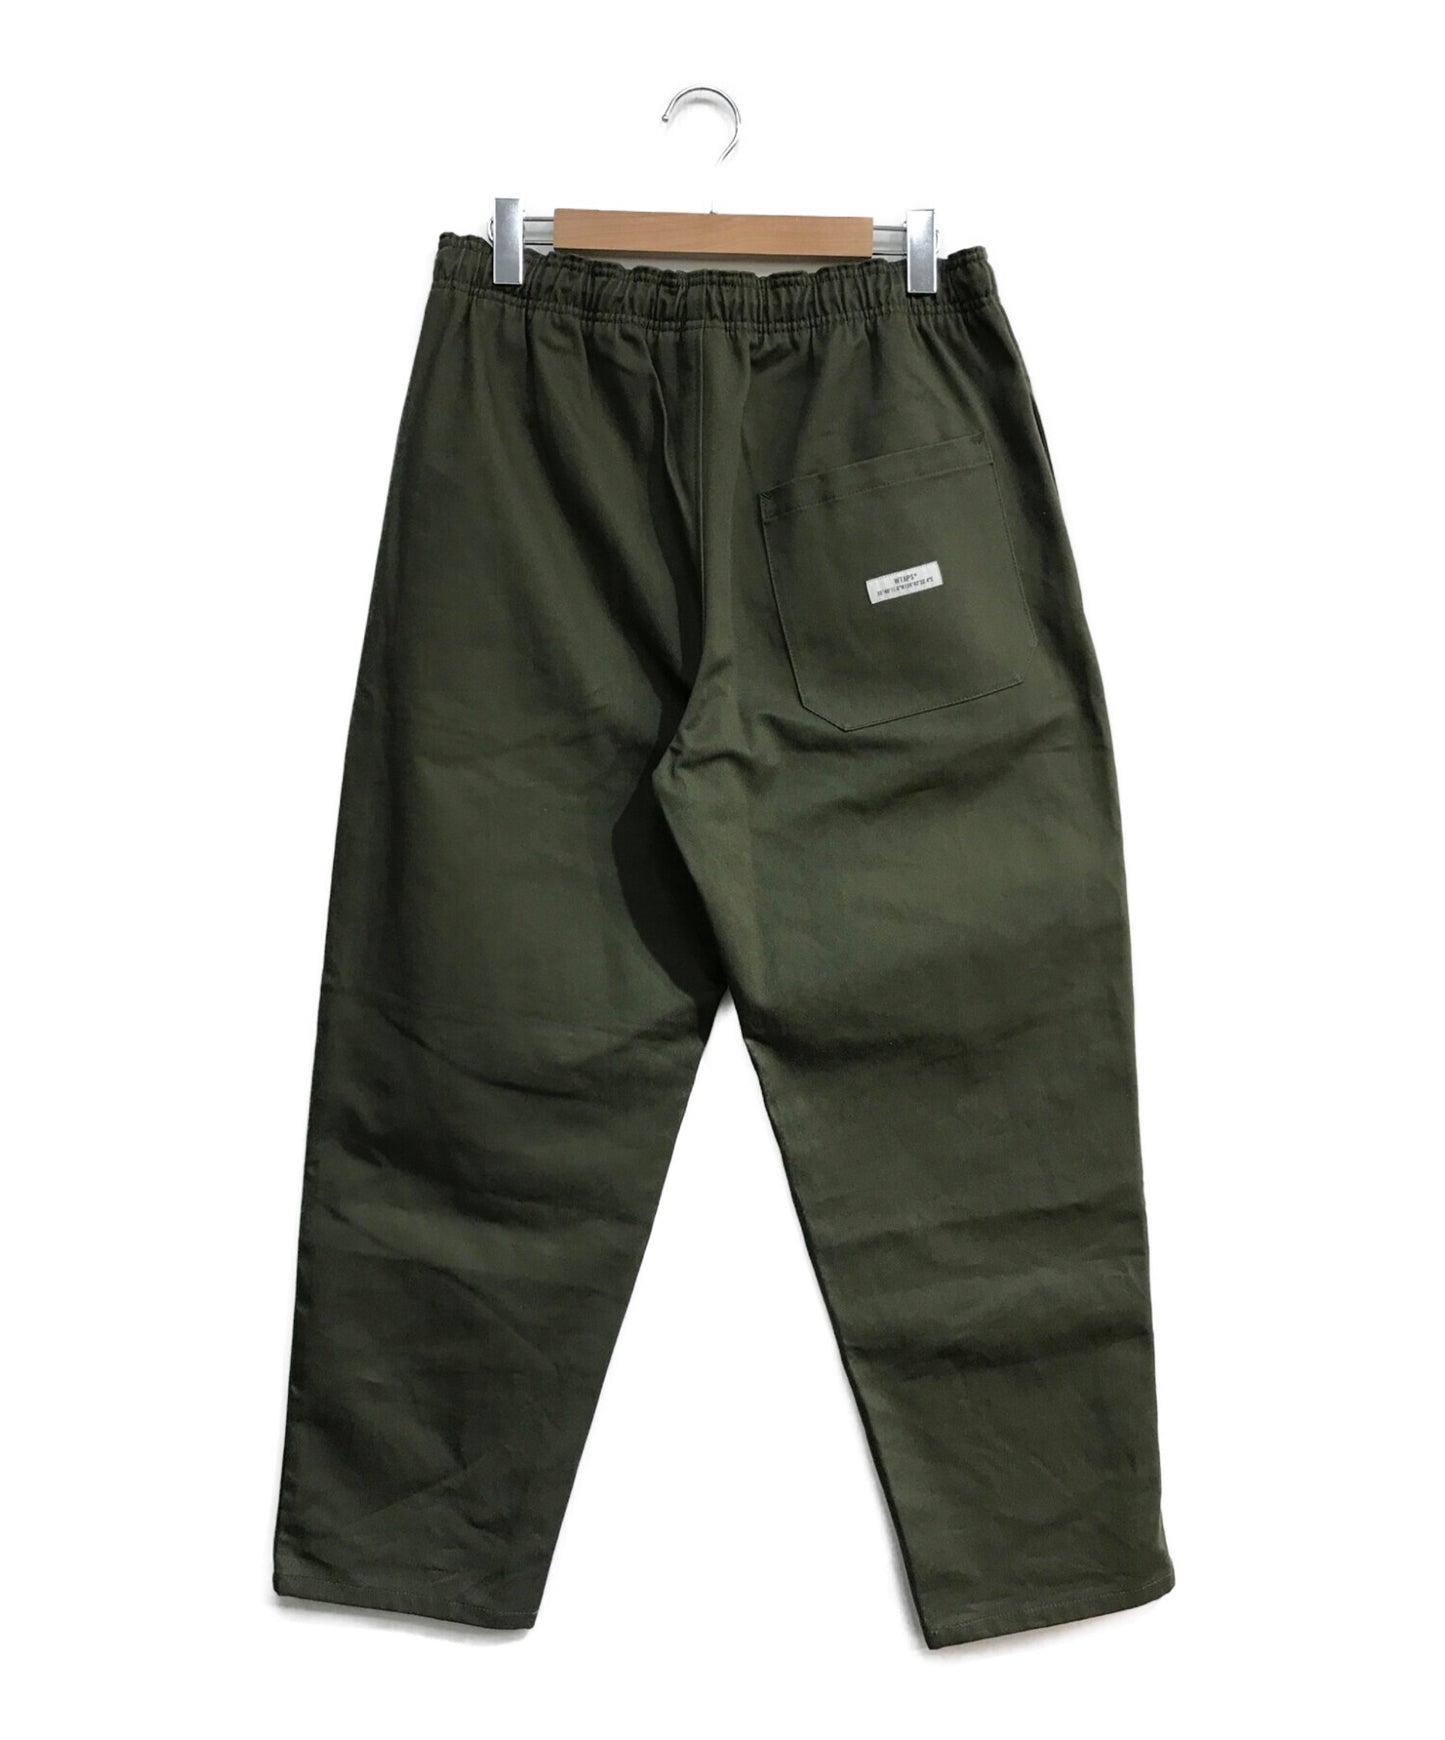 WTAPS seagull  trousers cotton twill wvdt ptm wvdt